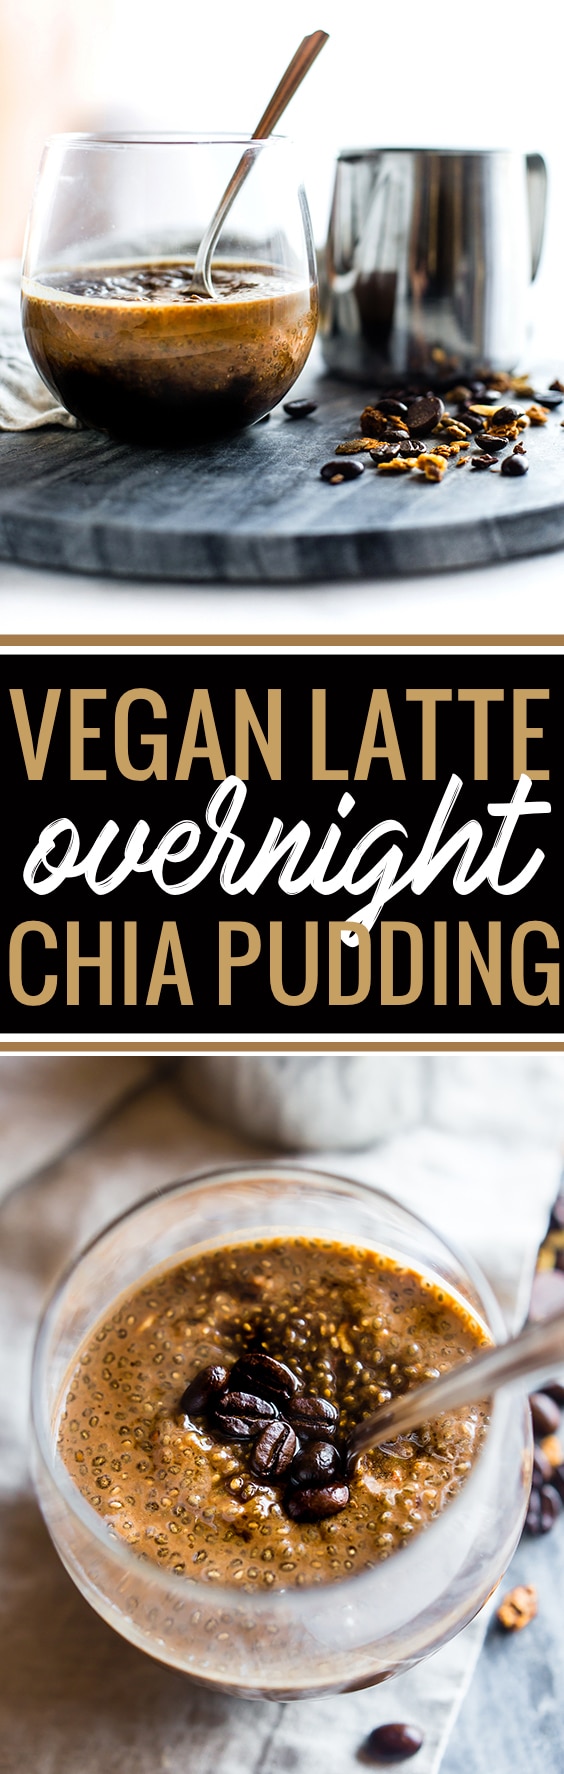 Vegan Latte Overnight Protein Chia Pudding! Delicious and healthy chia seed pudding packed with plant based protein and a kick of caffeine/coffee. This protein pudding makes for a nutrient dense breakfast that’s naturally gluten free and easy to make ahead! www.cottercrunch.com